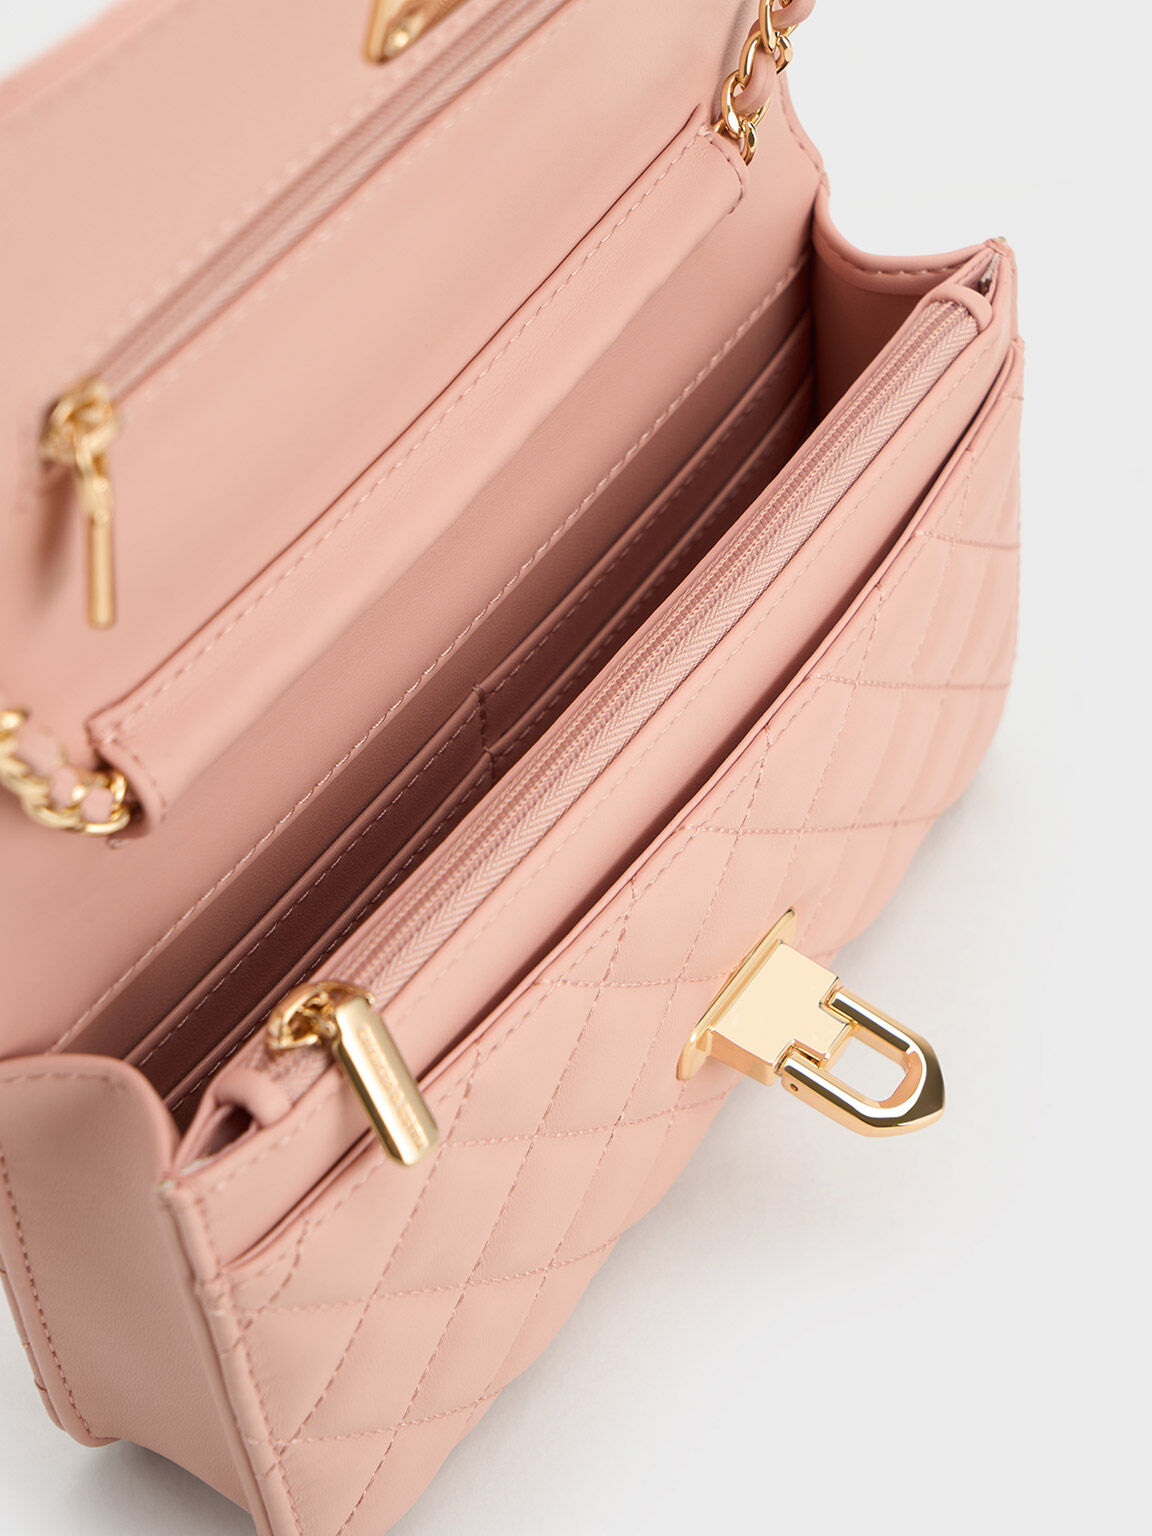 CHARLES KEITH & Push-Lock US Quilted Clutch - Pink Cressida